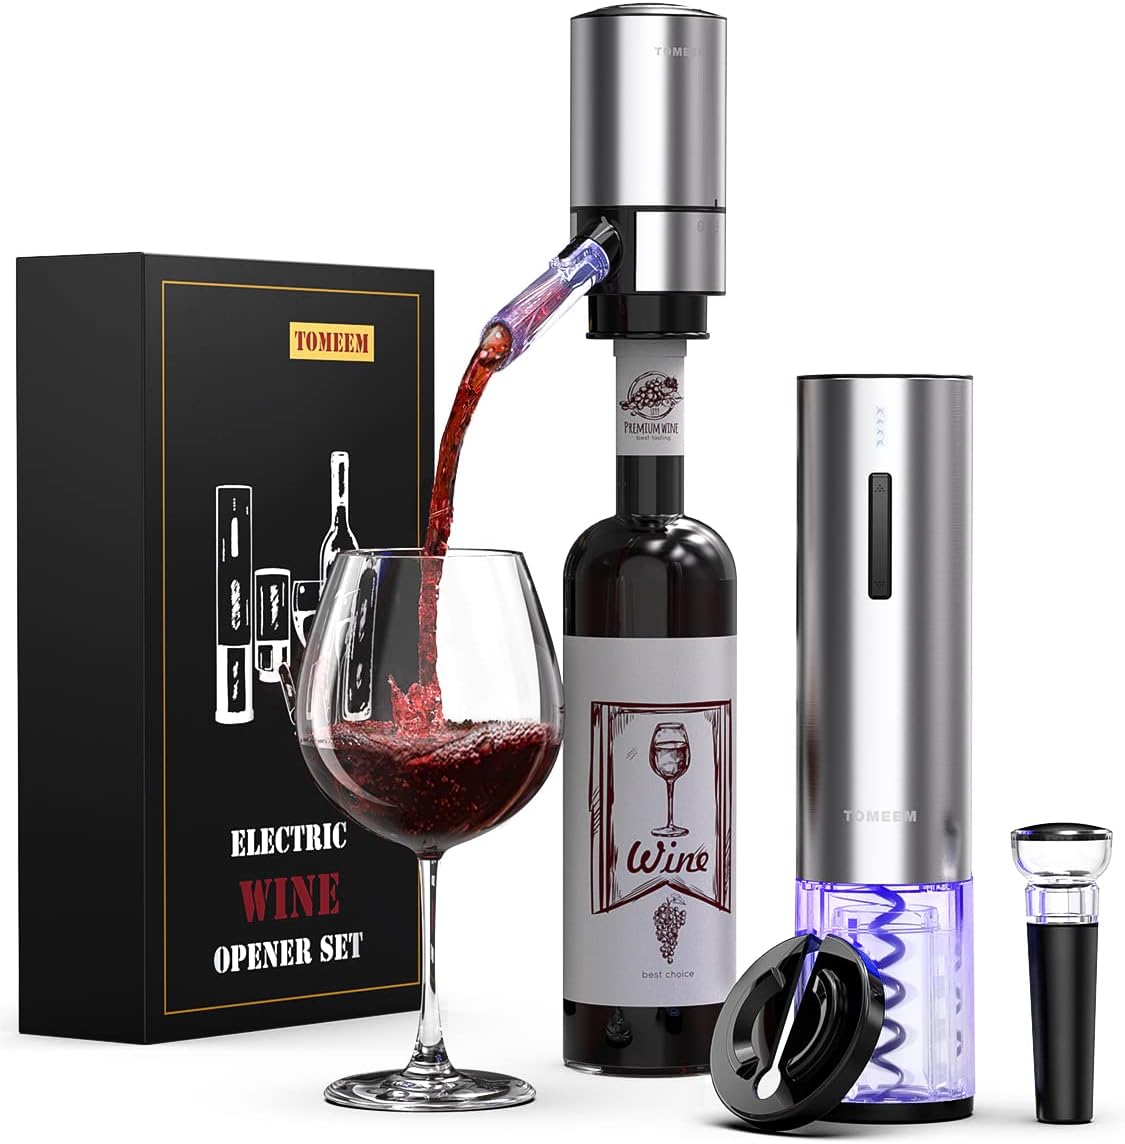 Electric Wine Opener Set, Tomeem Wine Gift with Rechargeable Electric Wine Aerator, Vacuum Stoppers and Foil Cutter, 4-in-1 Electric Bottle Opener for Home Party Bar Outdoor: Home Kitchen